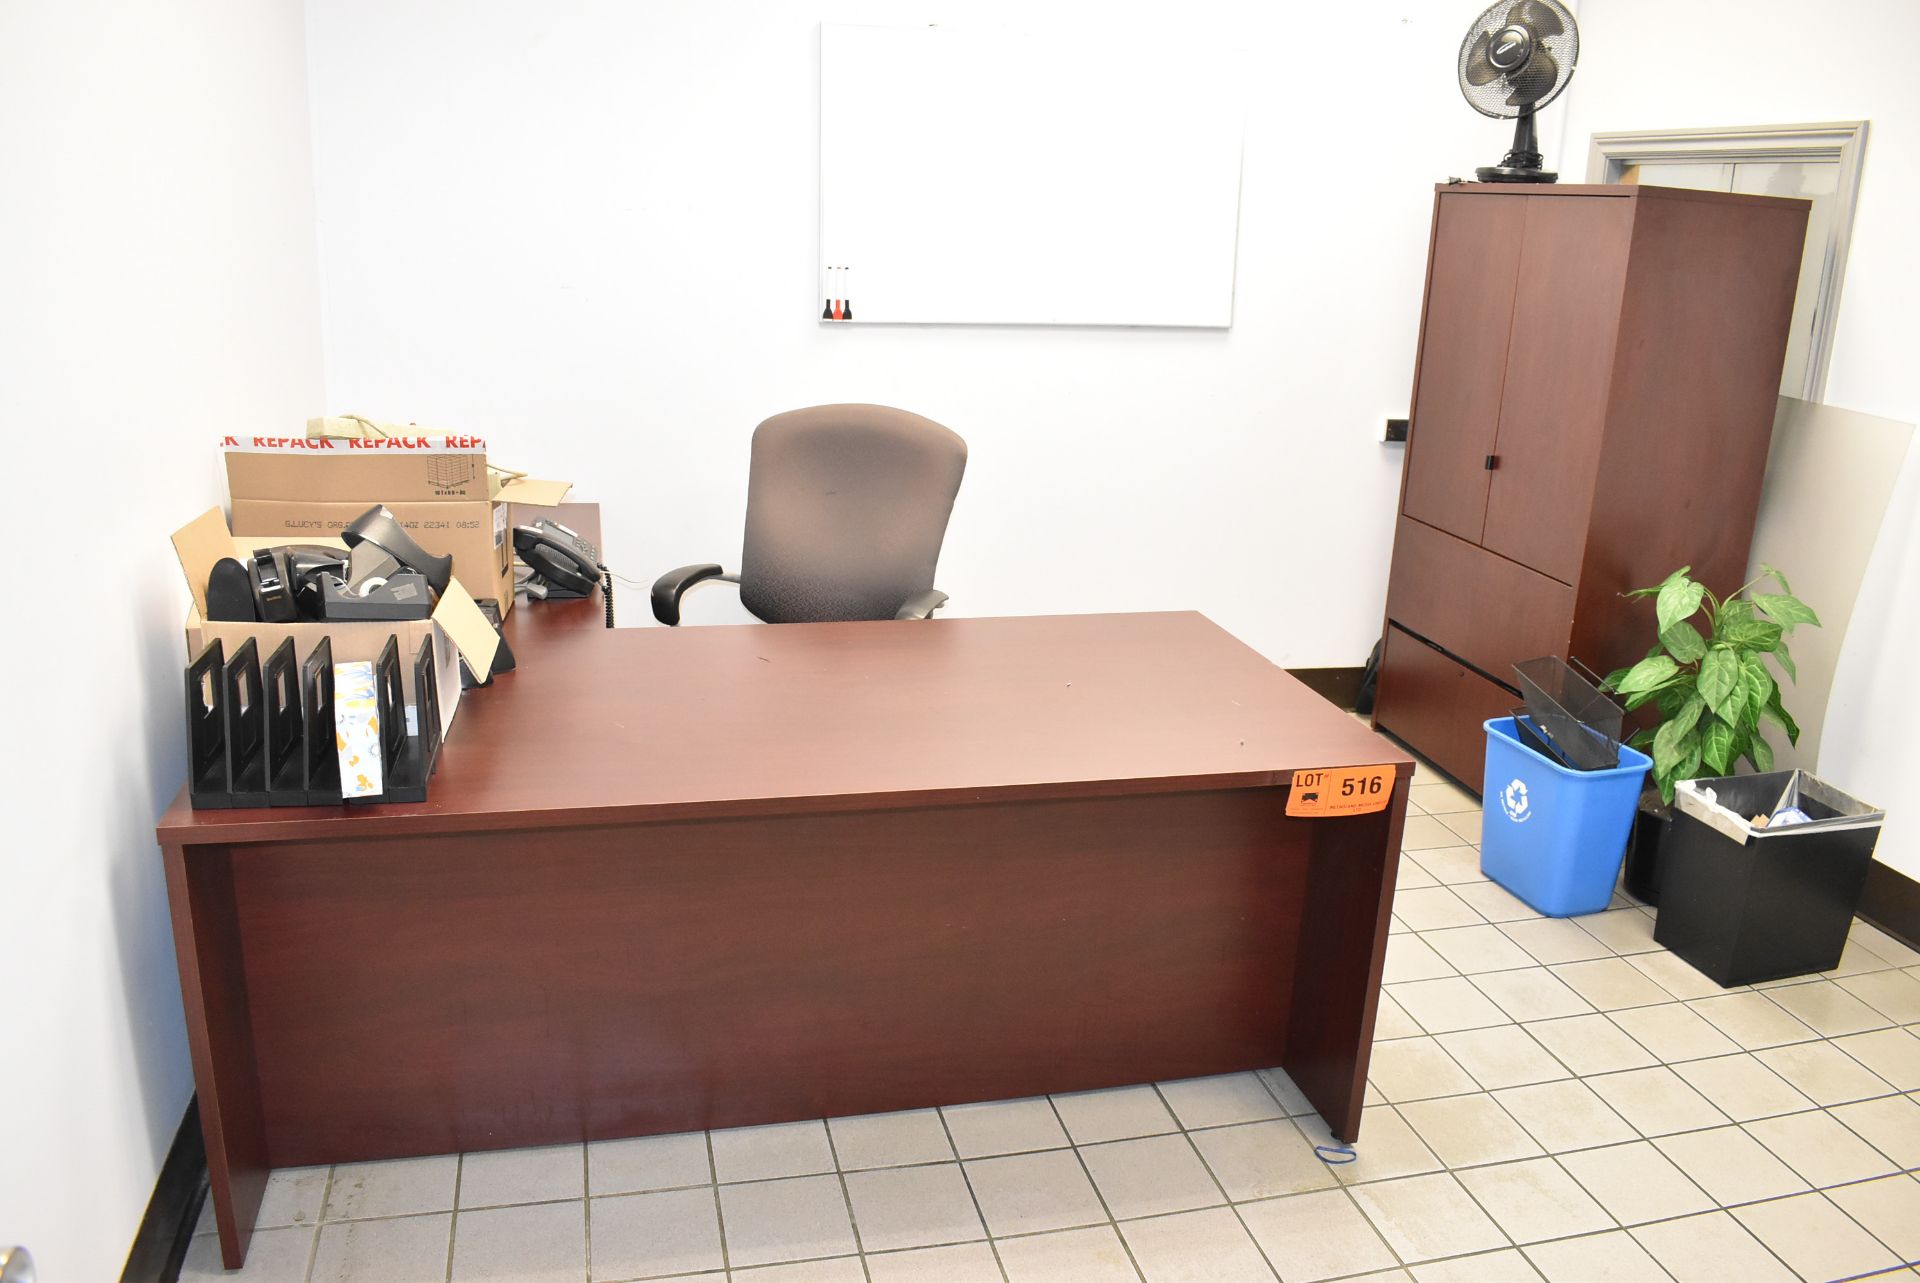 LOT/ CONTENTS OF OFFICE CONSISTING OF DESK WITH OFFICE CHAIR, STORAGE CABINET, OFFICE SUPPLIES